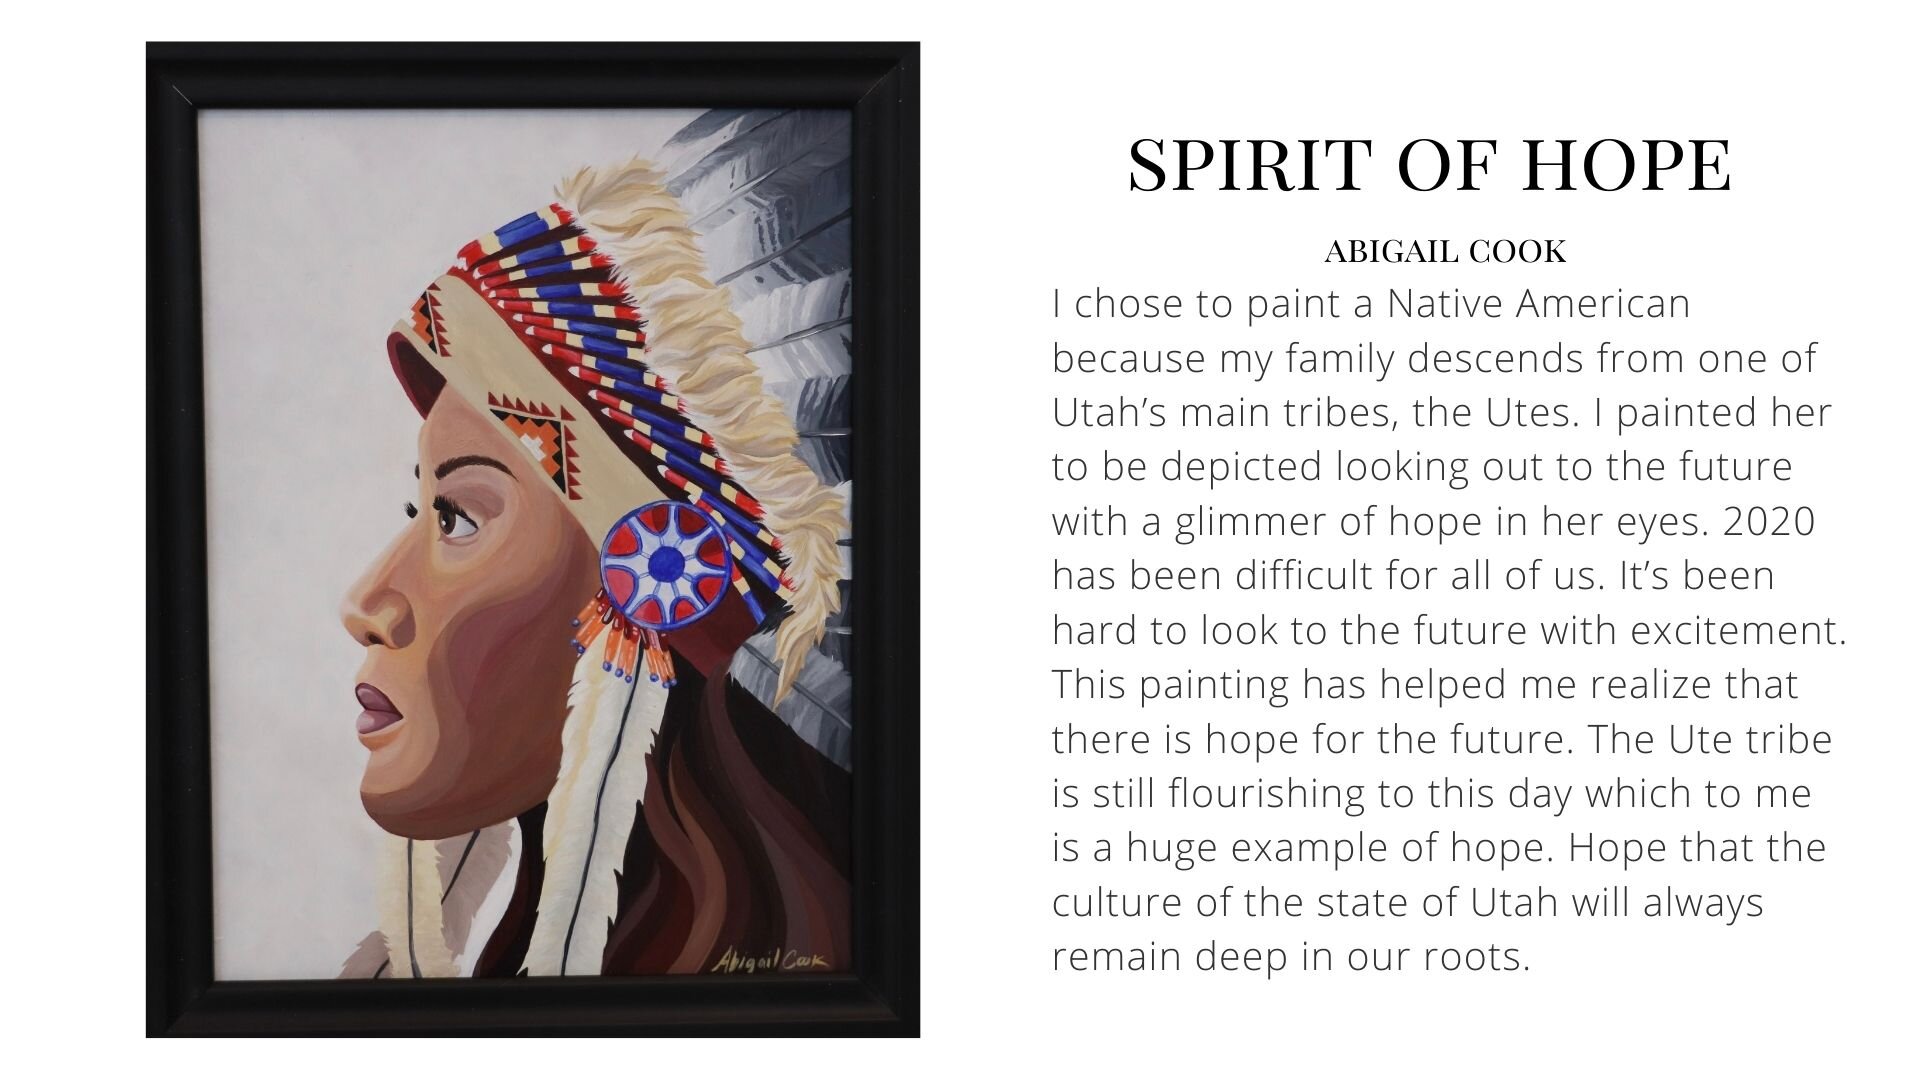 Spirit of Hope by Abigail Cook